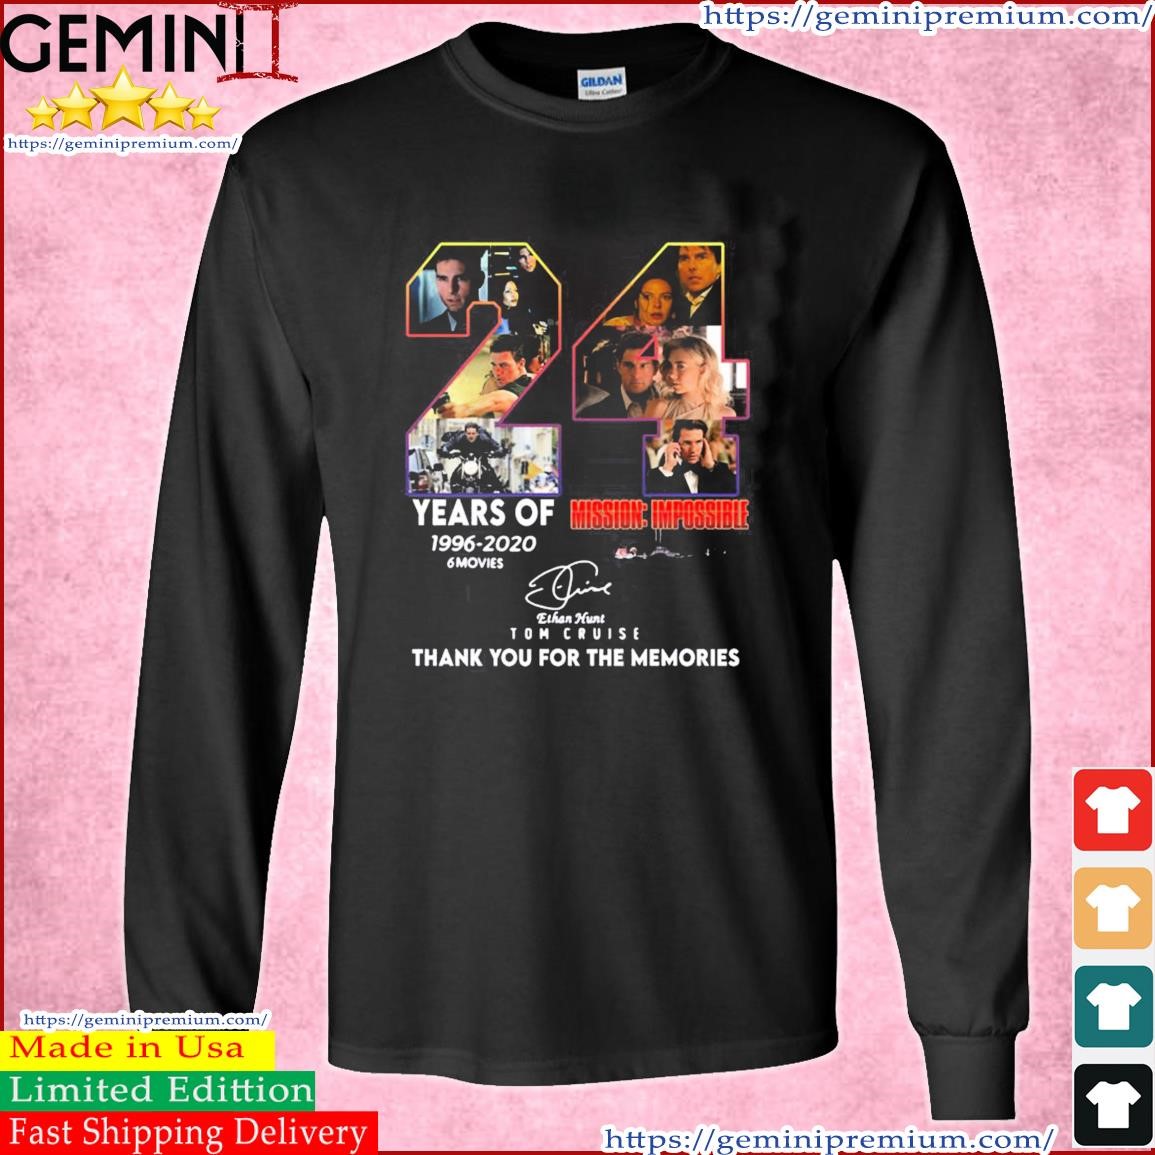 The Memories 24 Years Mission Impossible Design Tom Cruise Shirt Long Sleeve Tee.jpg